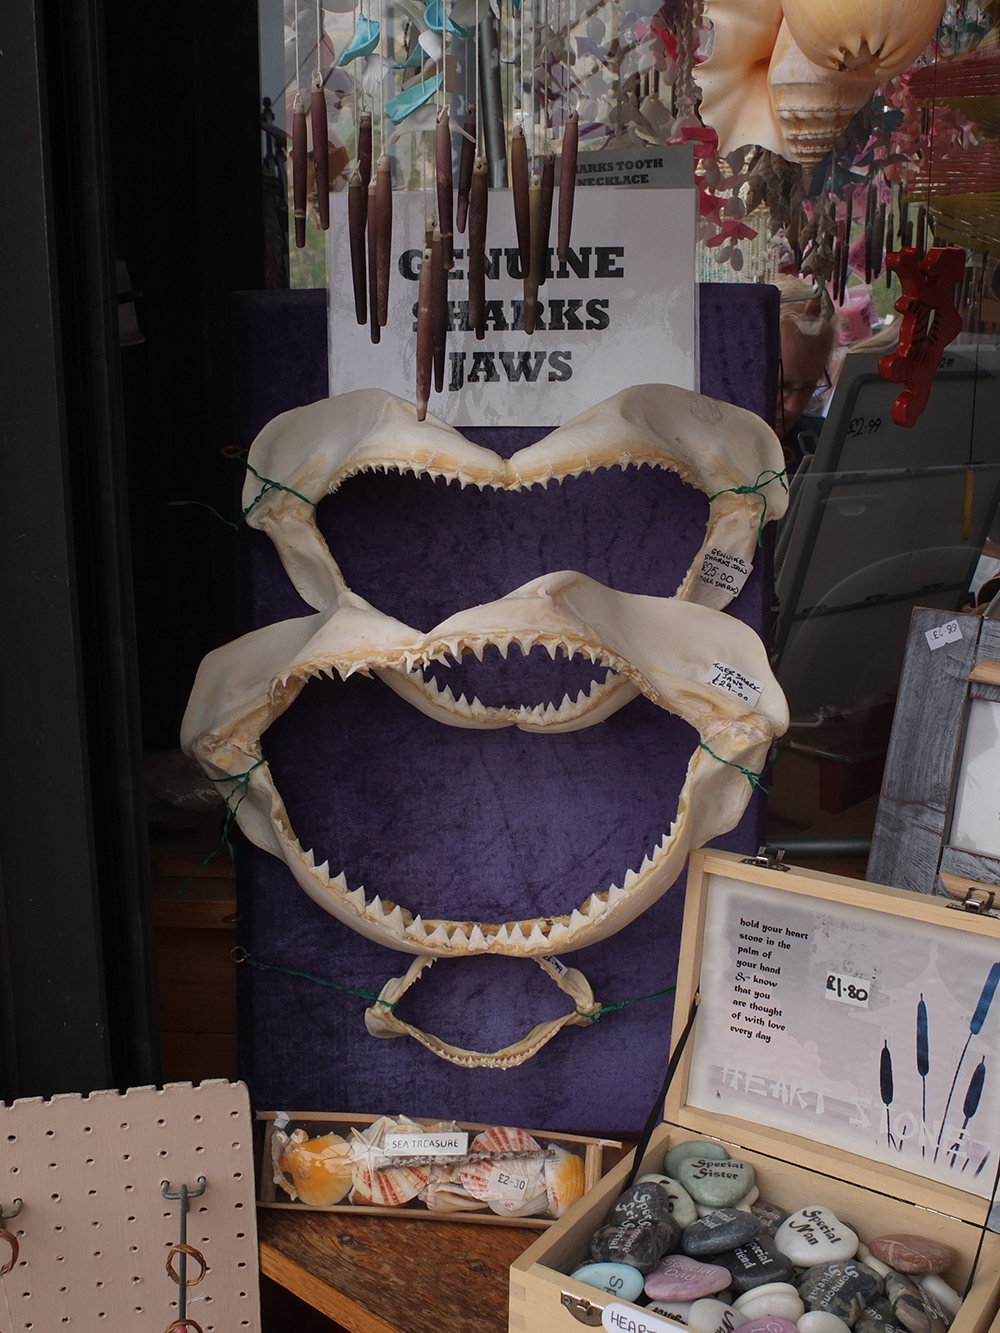 Listed as 'near threatened' by the IUCN, these Tiger Shark jaws were on sale in the UK. I was asked niot to go into the shop and shout.